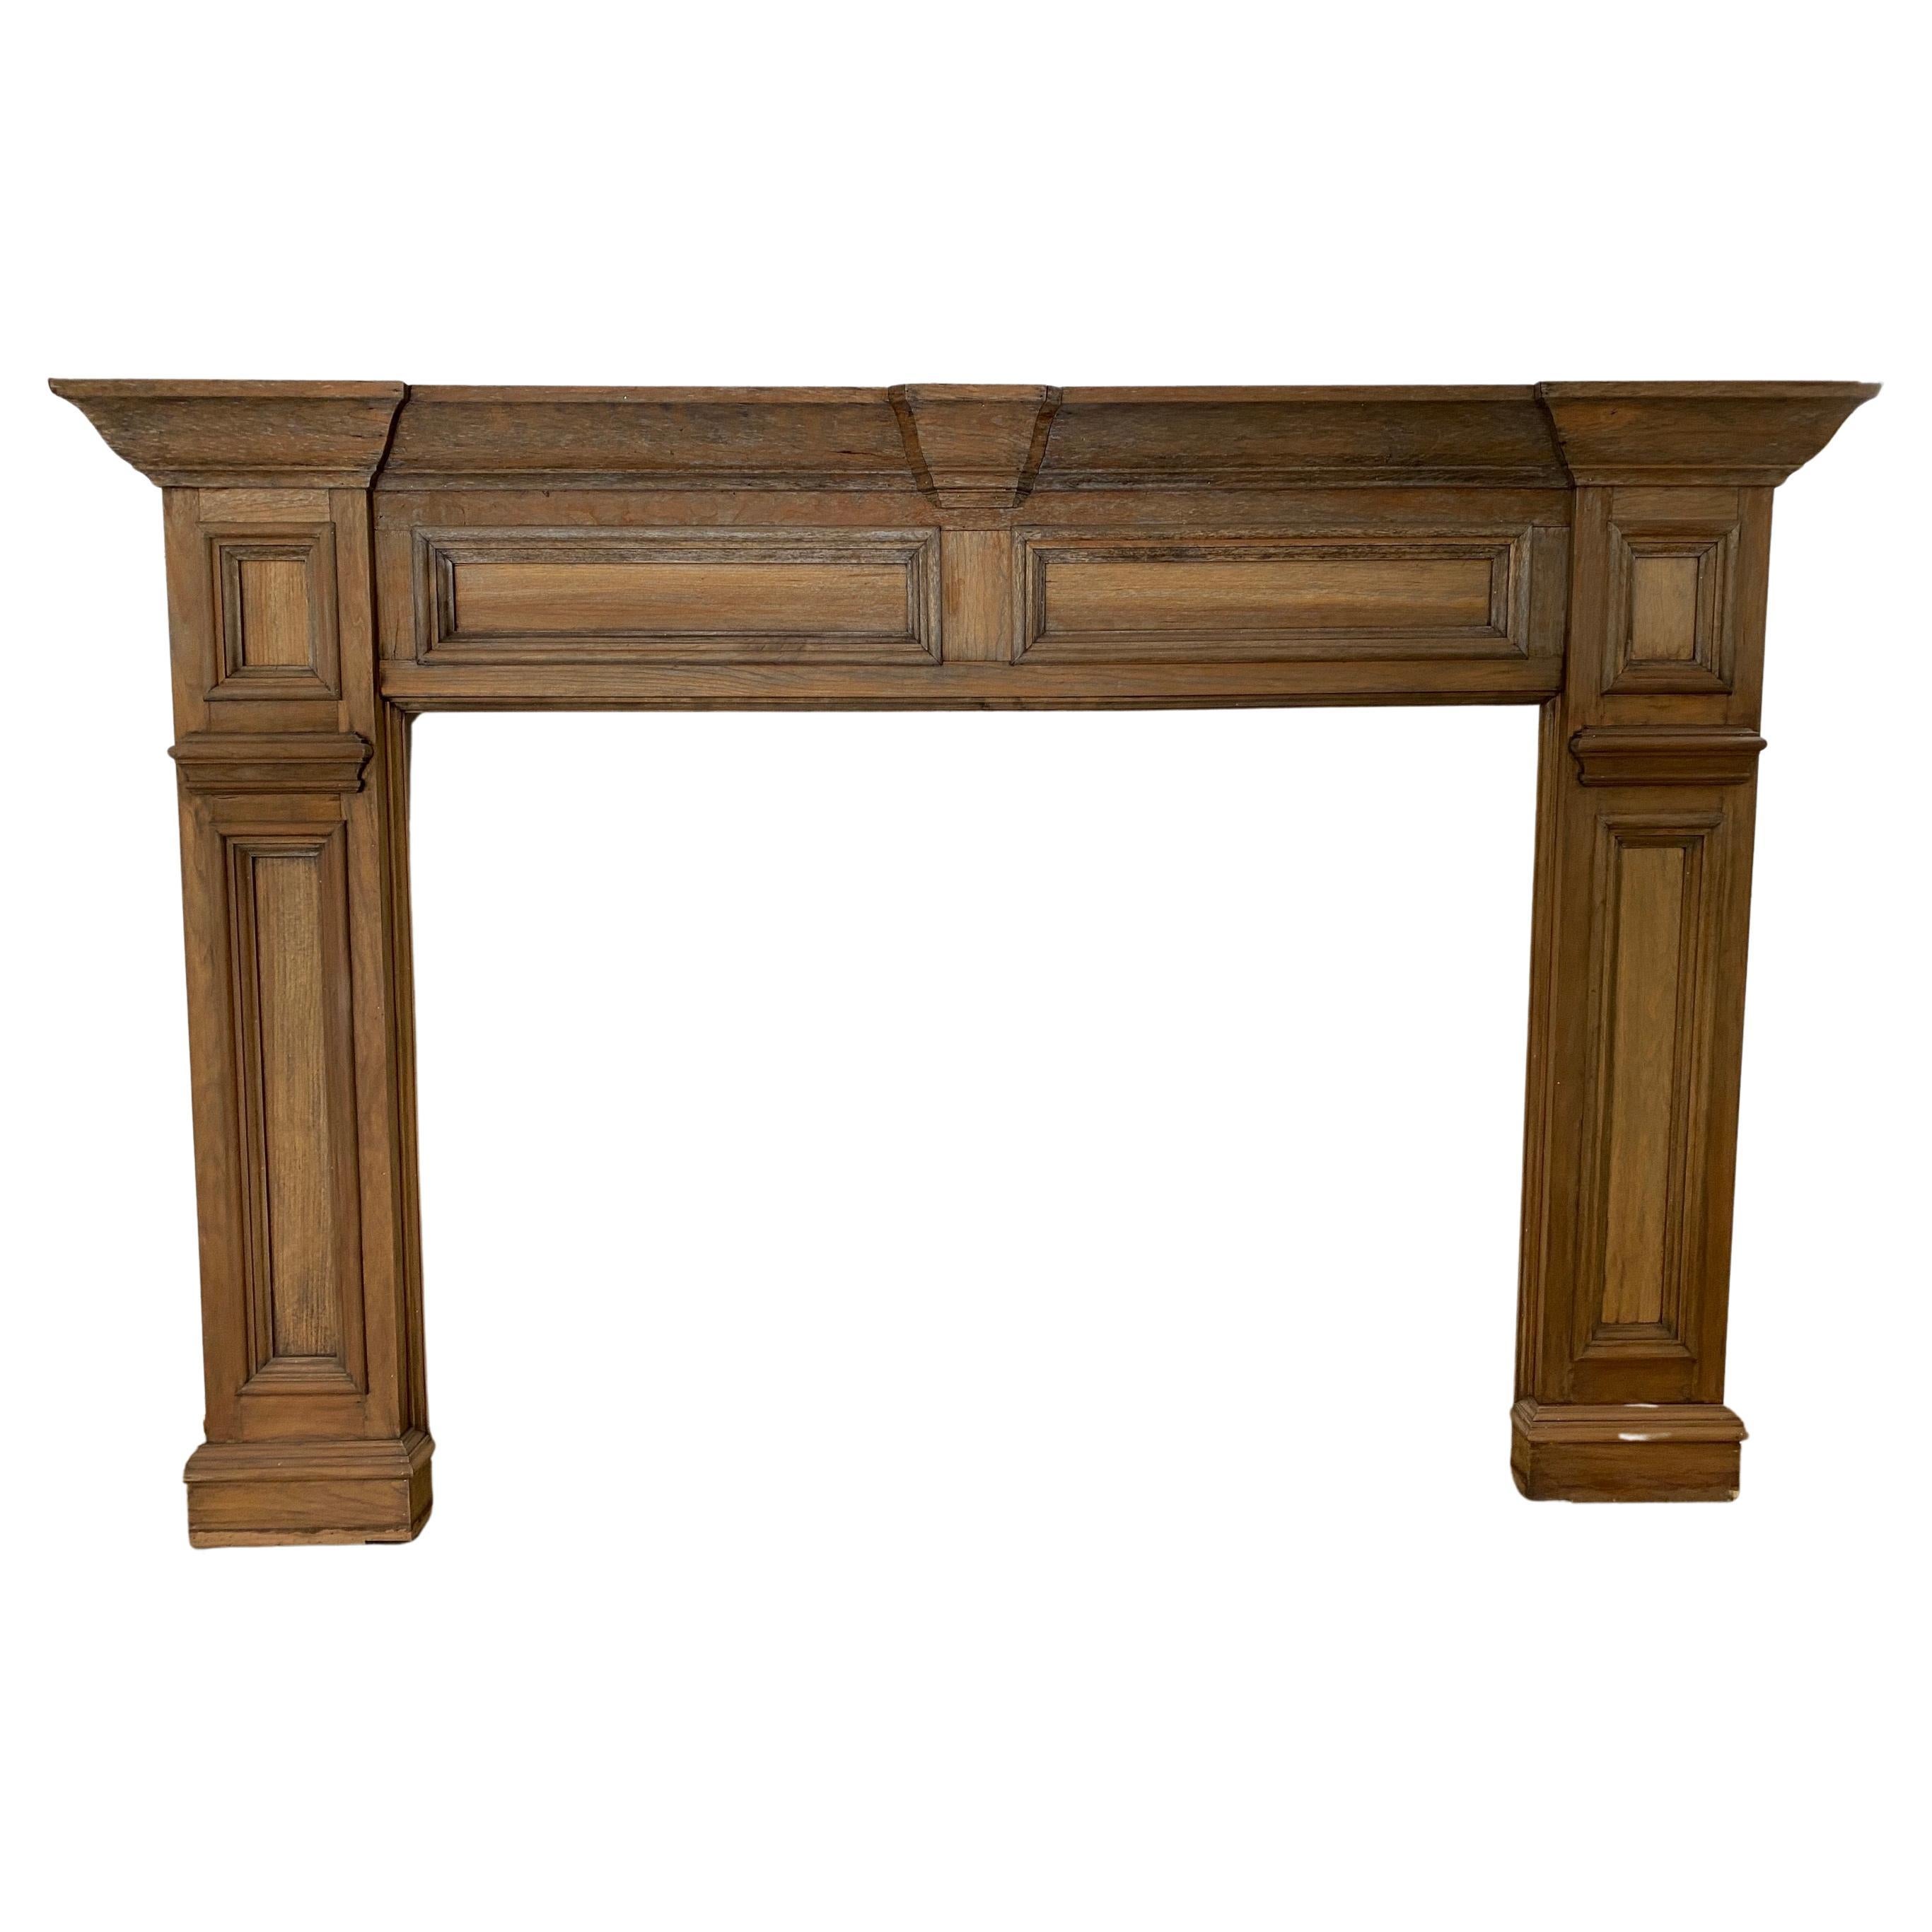 Antique Federal Style Wooden Fireplace Mantel